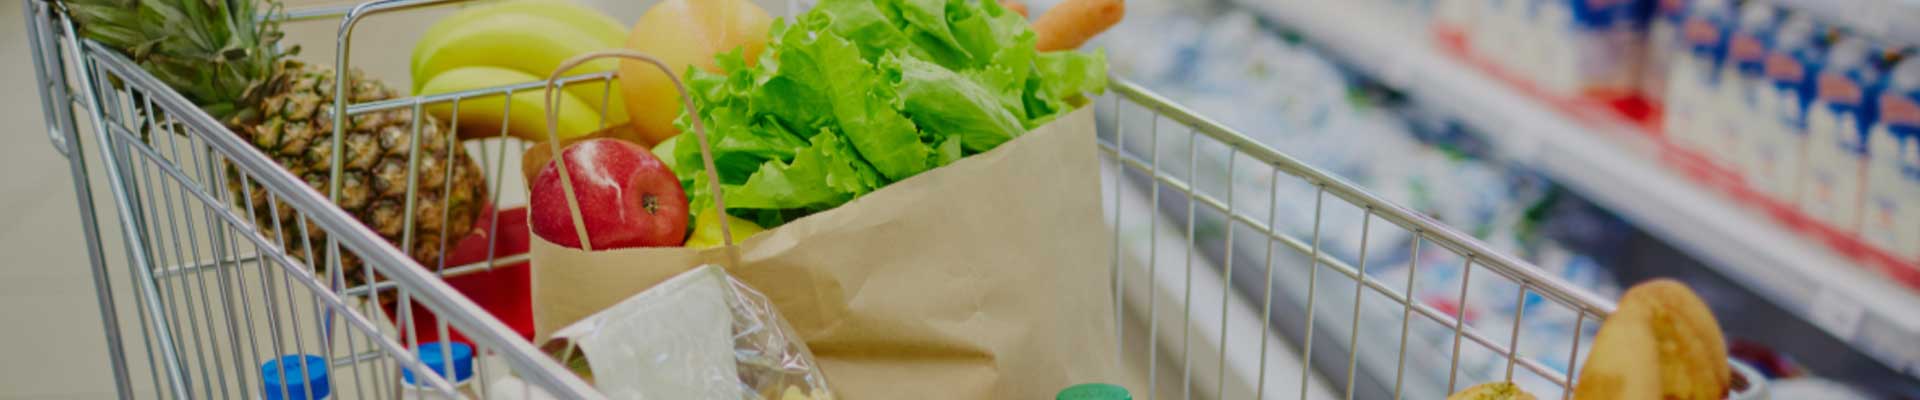 Biodegradable Food Packaging in Catering